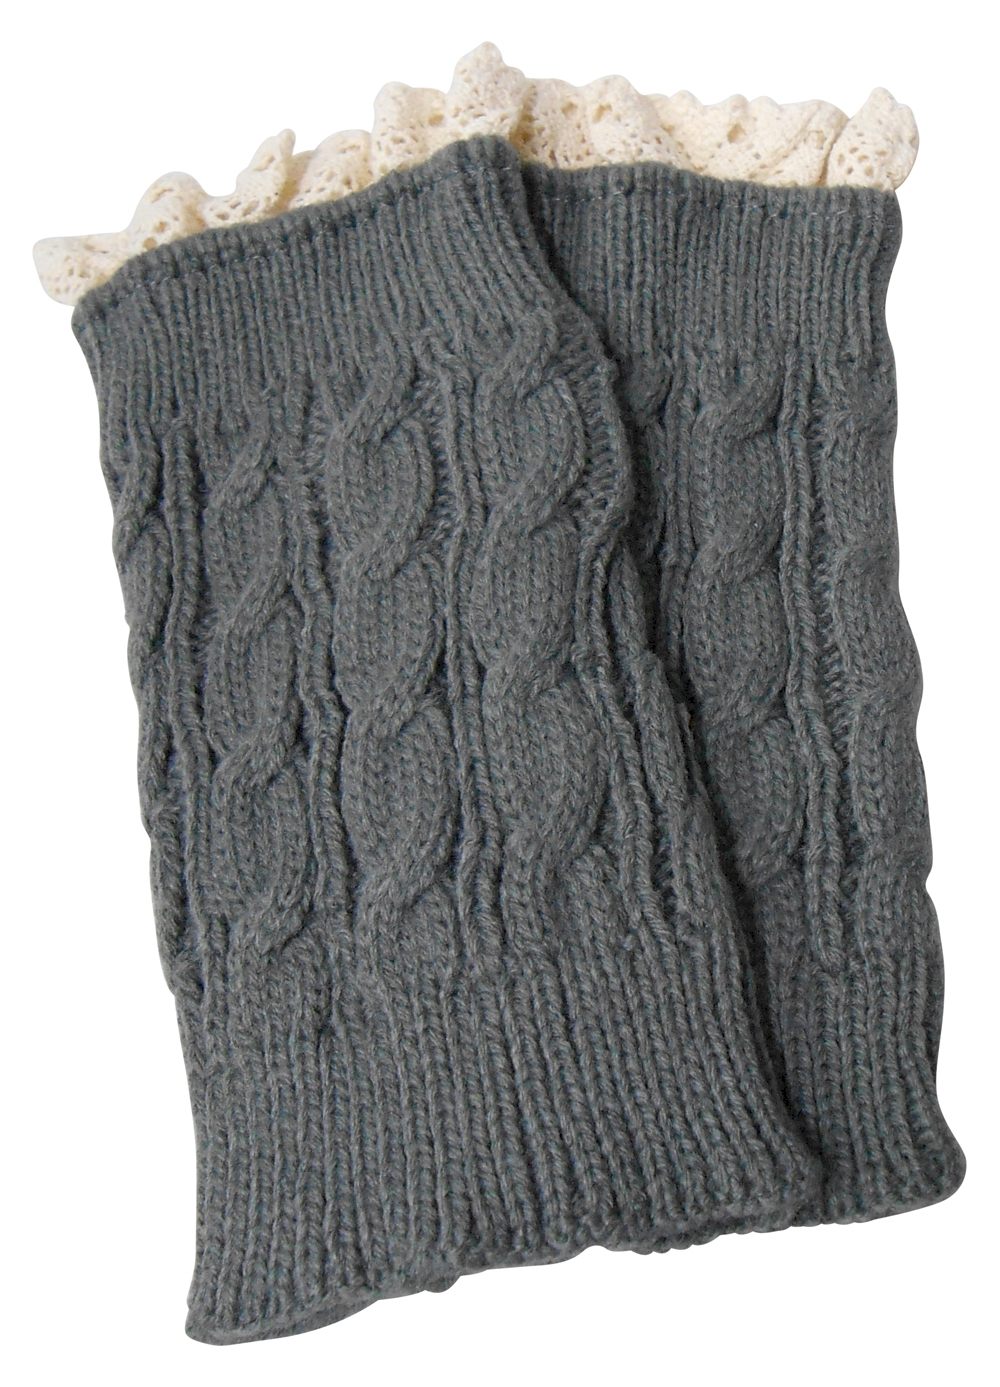 Cable Knit Boot Cuff with Lace Top - GRAY - CLOSEOUT